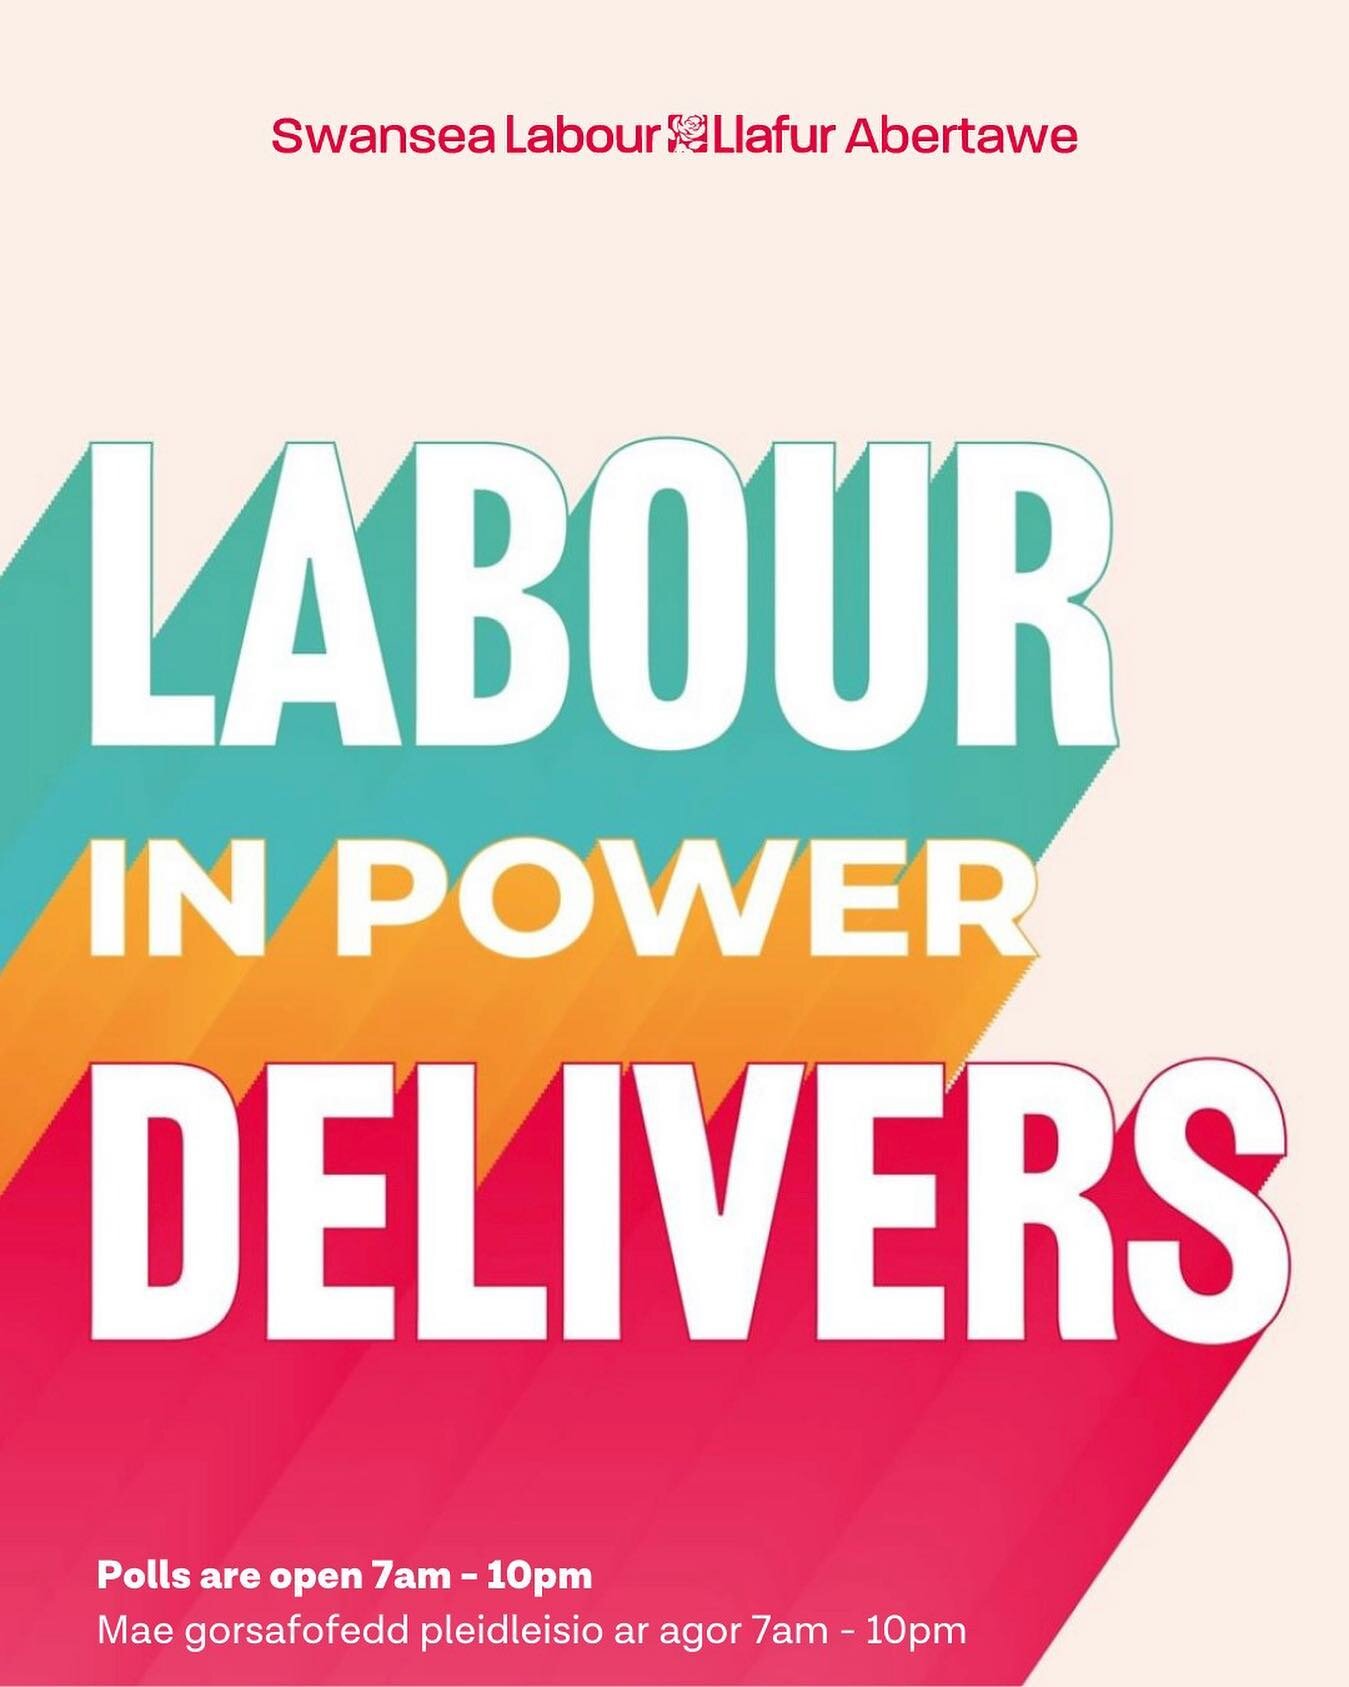 🚨 POLLS ARE NOW OPEN! 🚨

⏰ Remember to vote Welsh Labour today! 
🪪 You do not need your Polling Card to vote
📮 You can bring your postal ballot to your polling station
❌ You might have multiple votes, use all of them for Welsh Labour

Polls are o